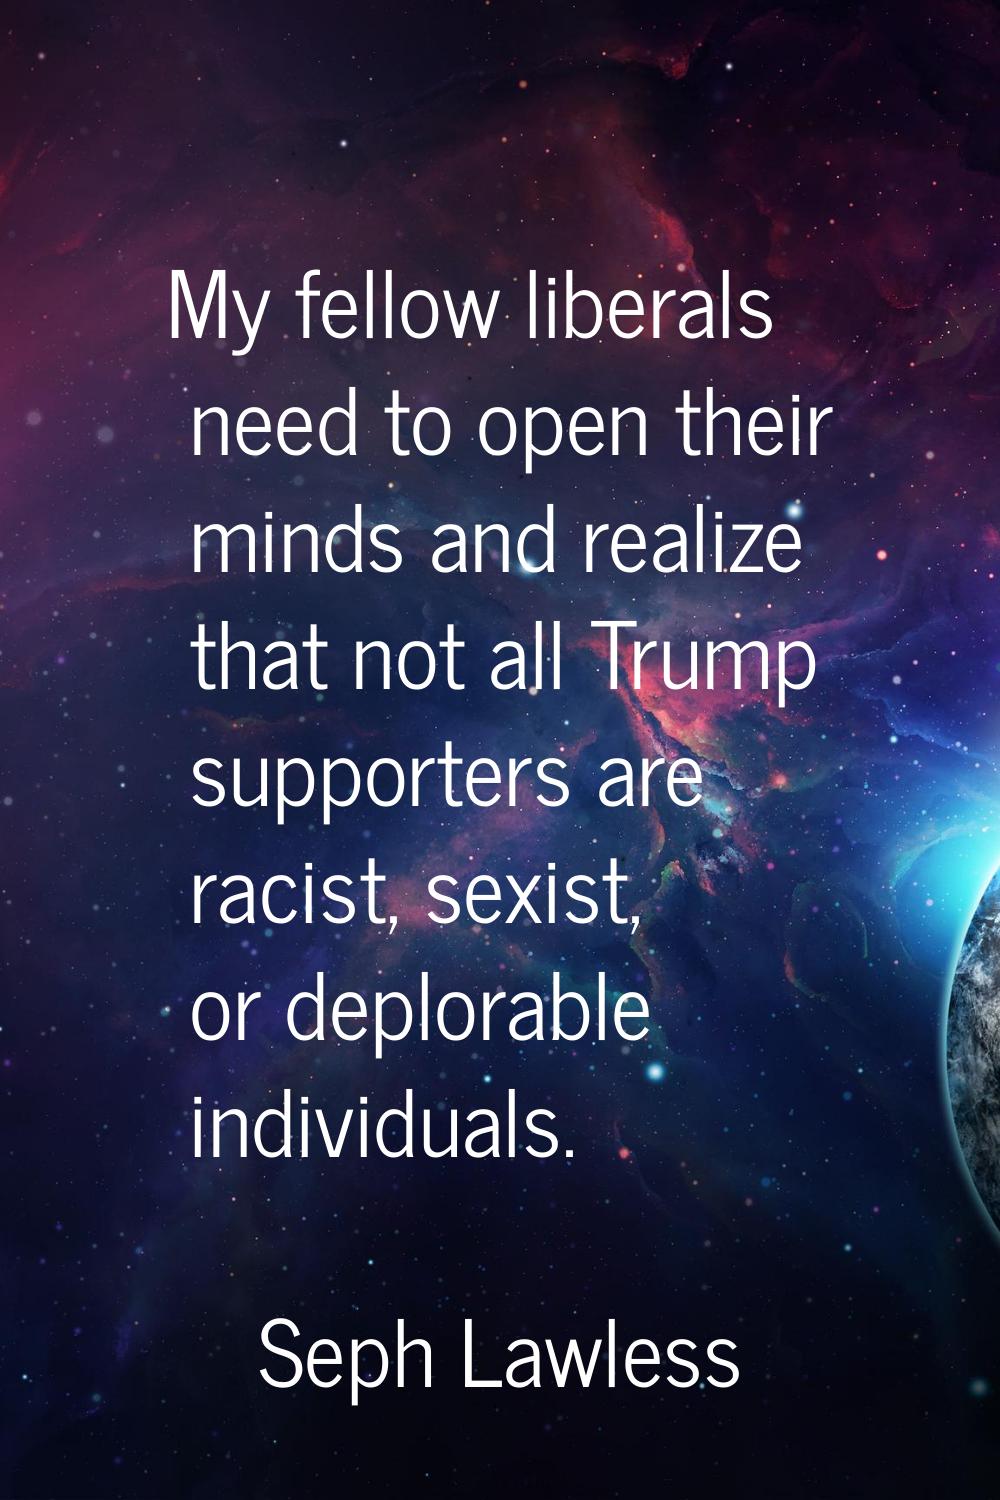 My fellow liberals need to open their minds and realize that not all Trump supporters are racist, s